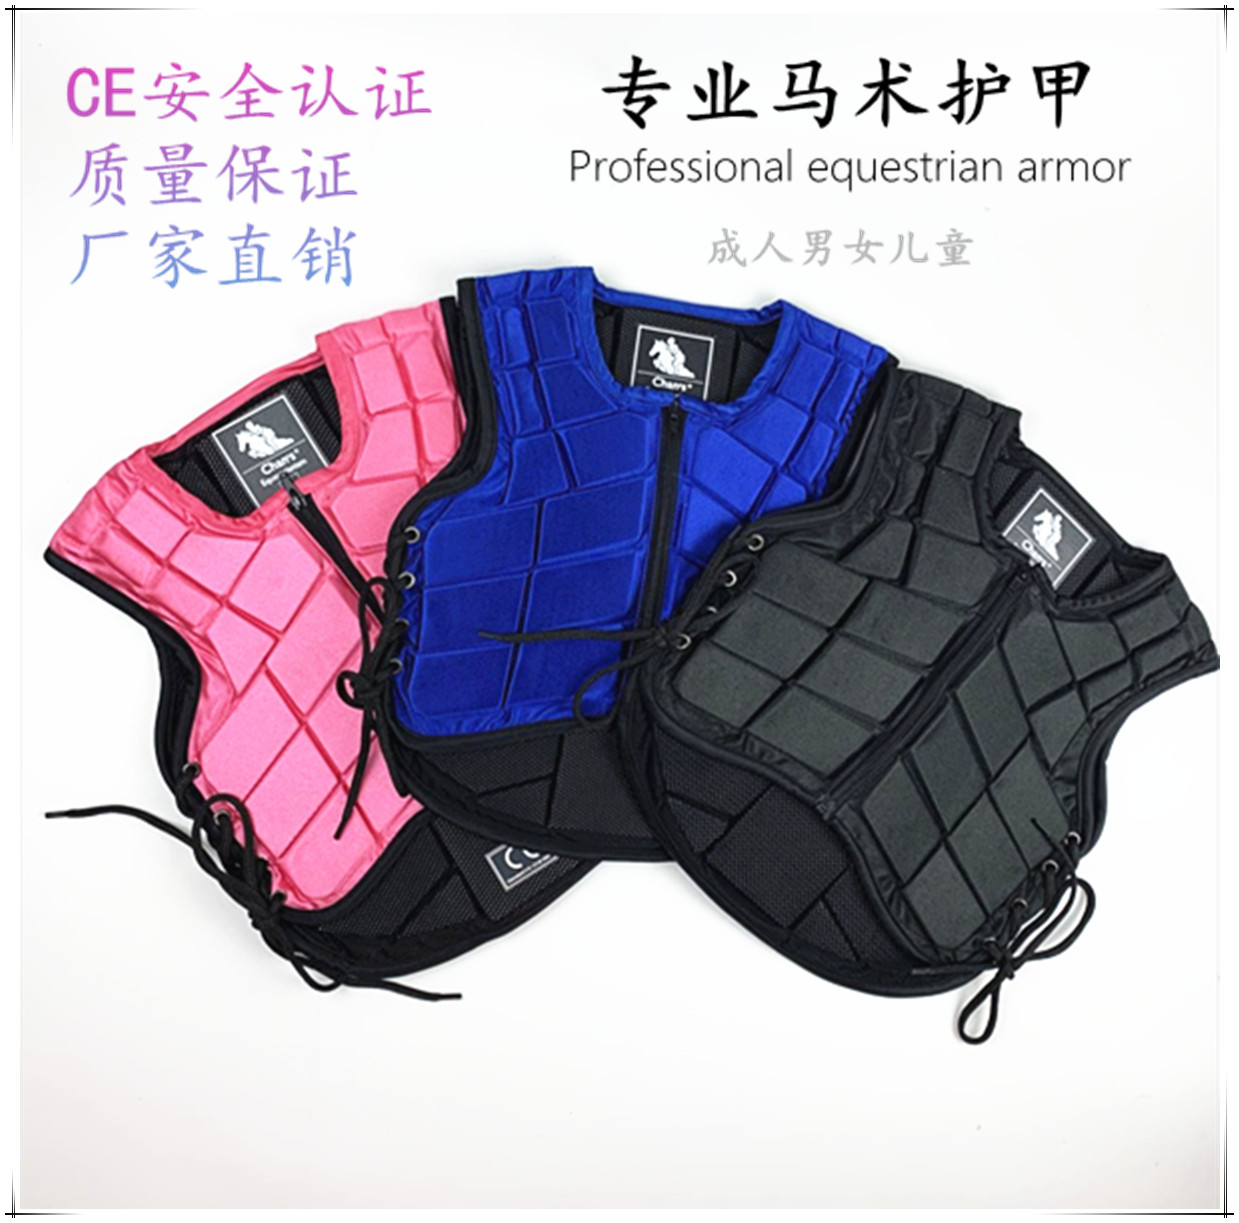 Brand equestrian vest armor protective clothing for children riding safety vest adult equestrian equipment riding clothing women